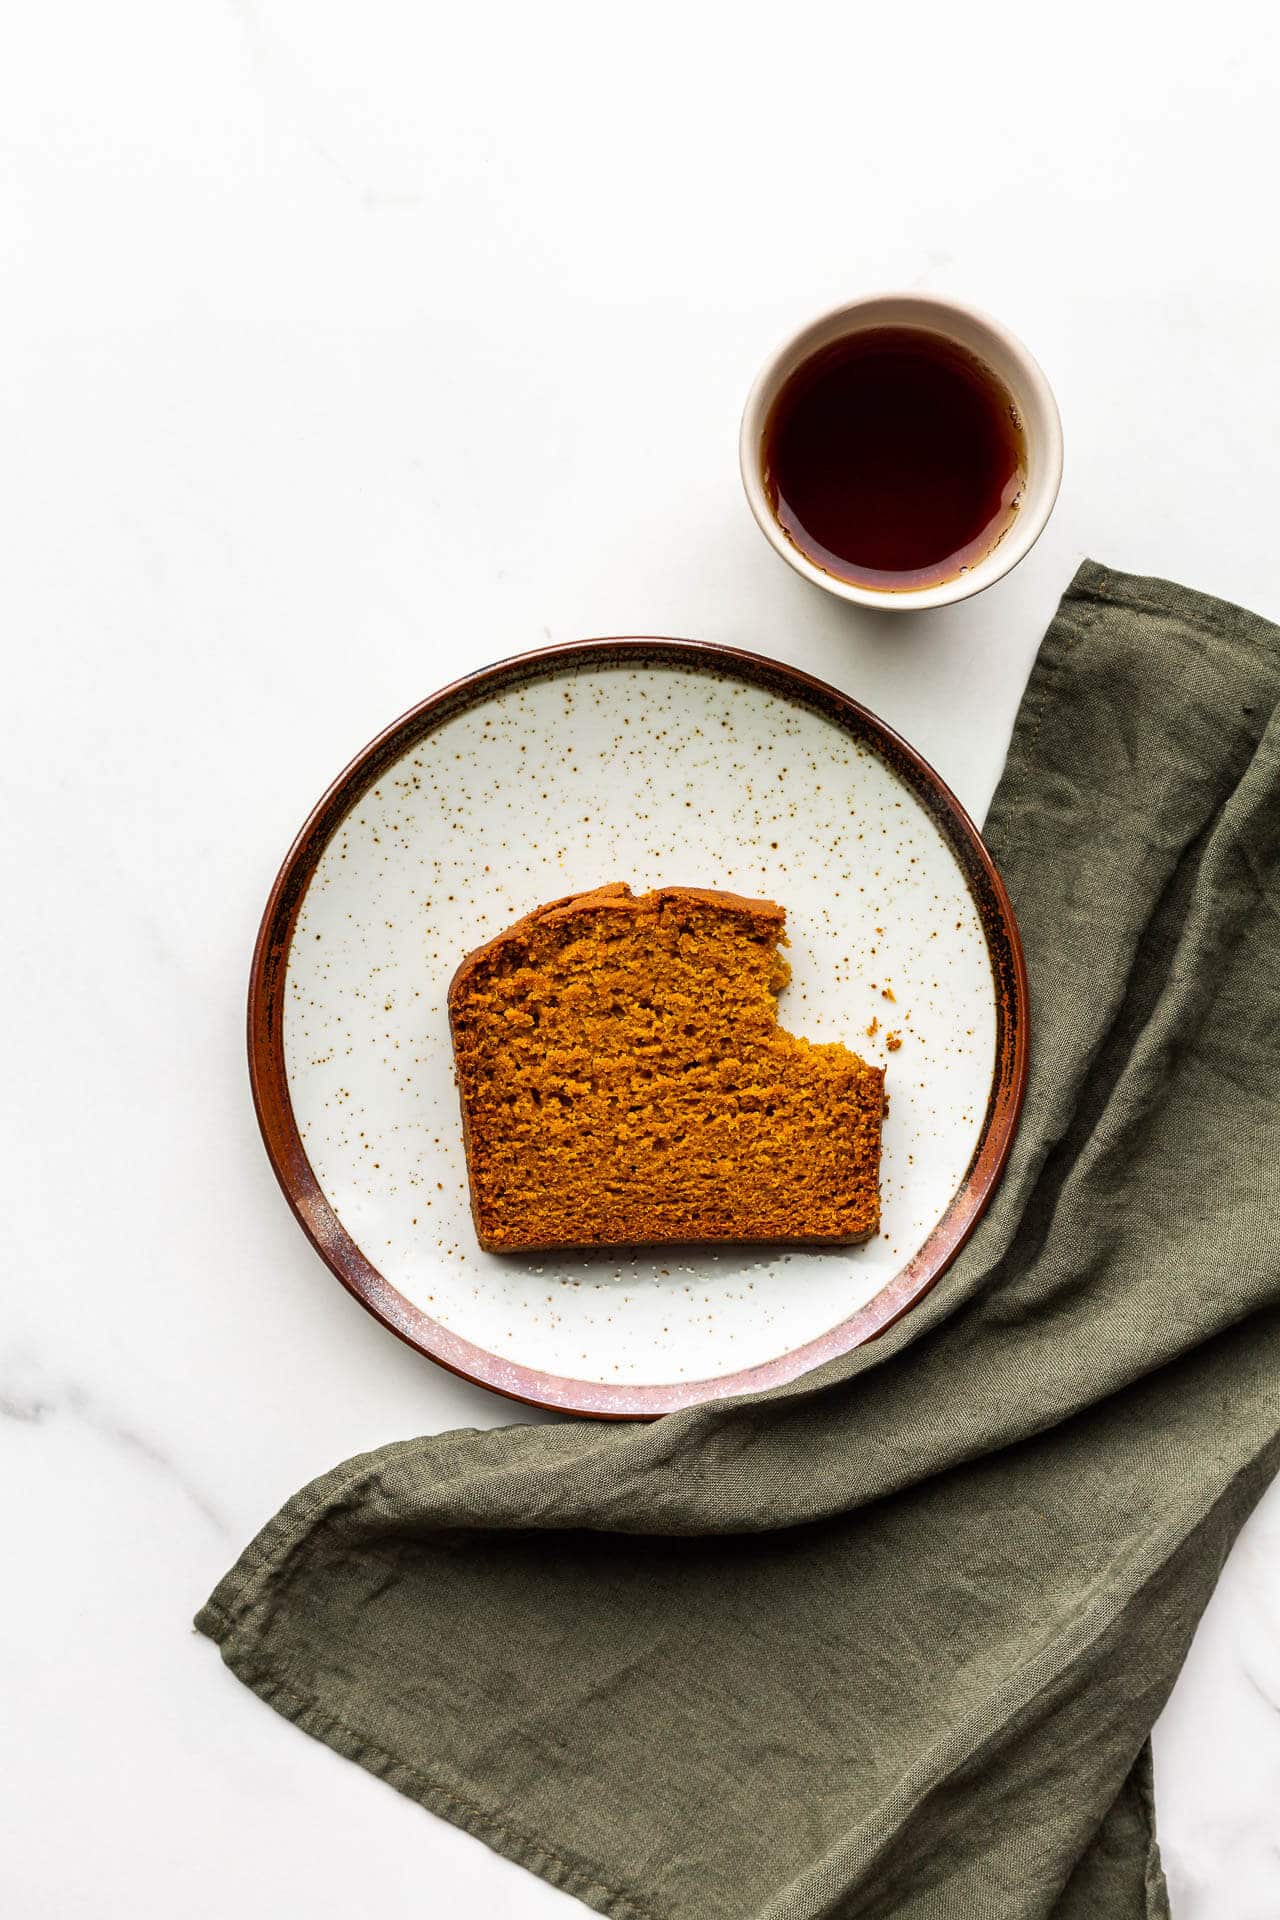 A slice of pumpkin spice bread with a bite taken out of it, with a green linen and a cup of tea on the side.